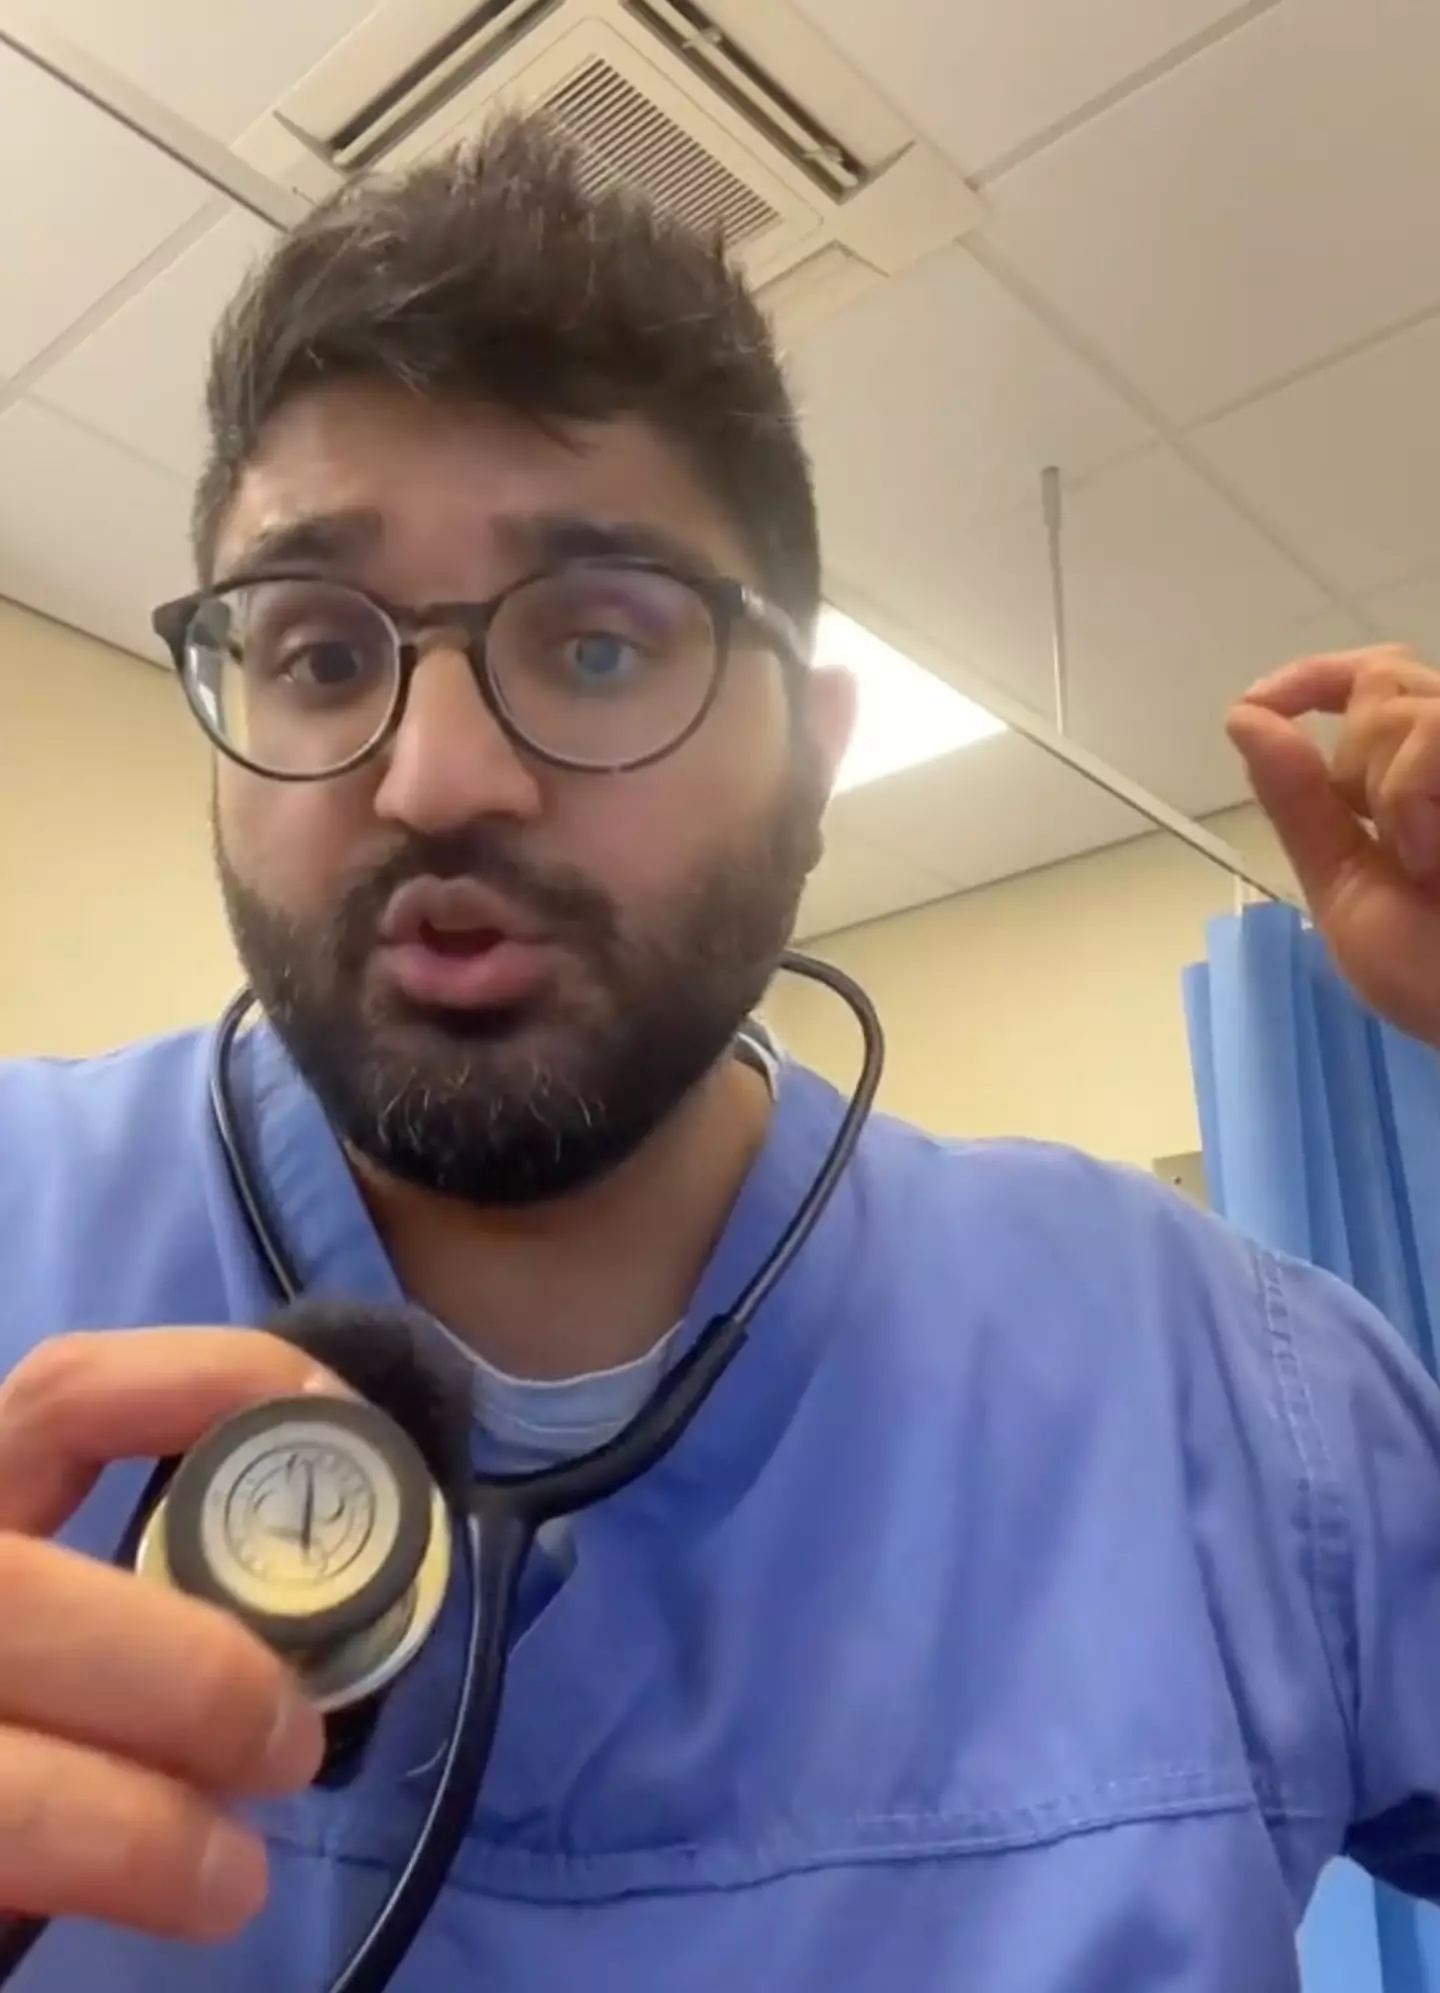 The GP warned that sticking a cotton bud down your lugholes can do serious damage (TikTok/@doctorsooj)